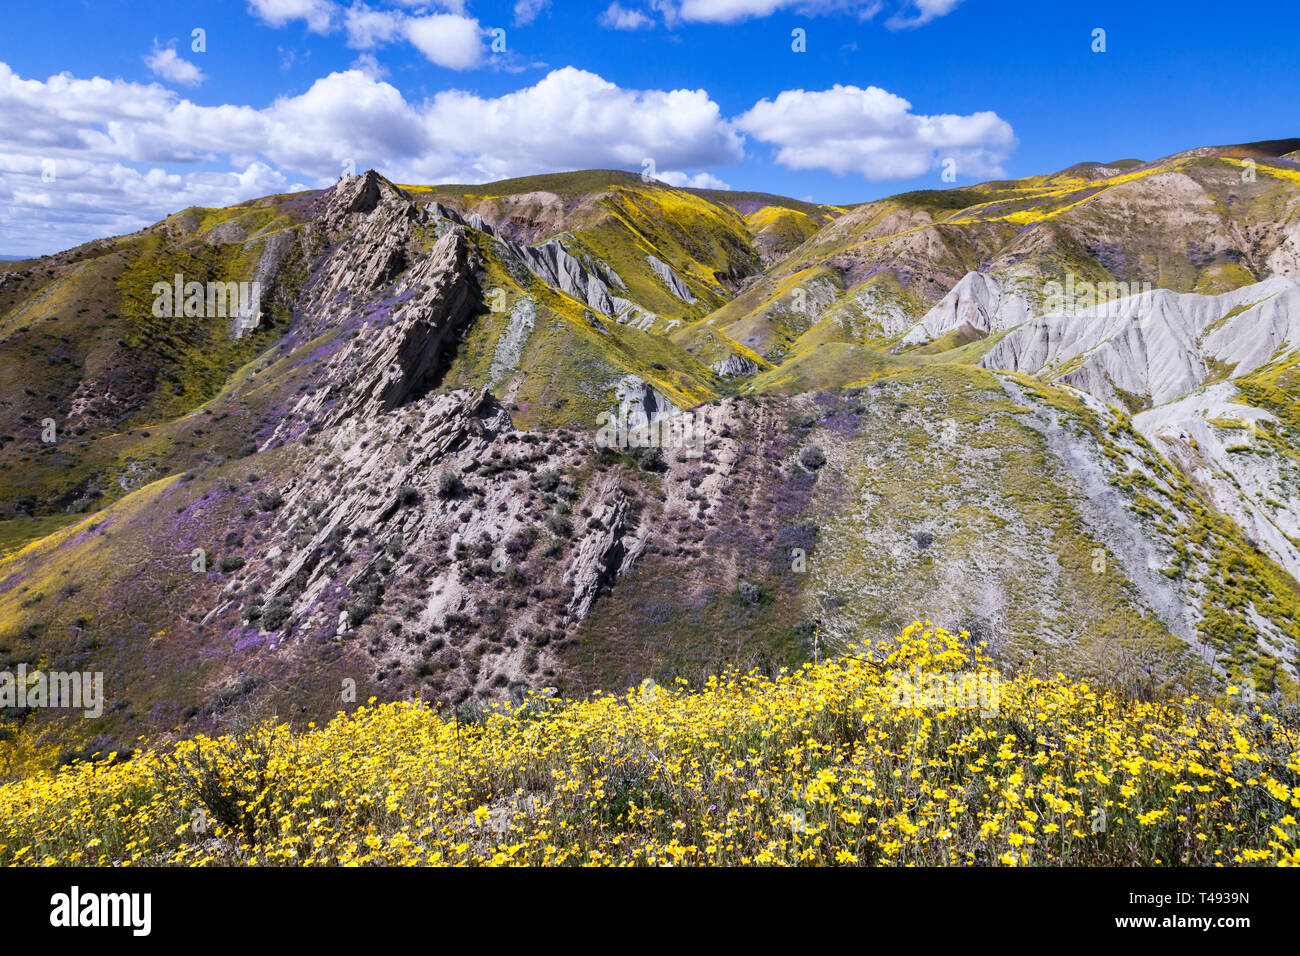 Wildflowers cover an outcropping along along the temblor range at the Carrizo Plain National Monument. Stock Photo